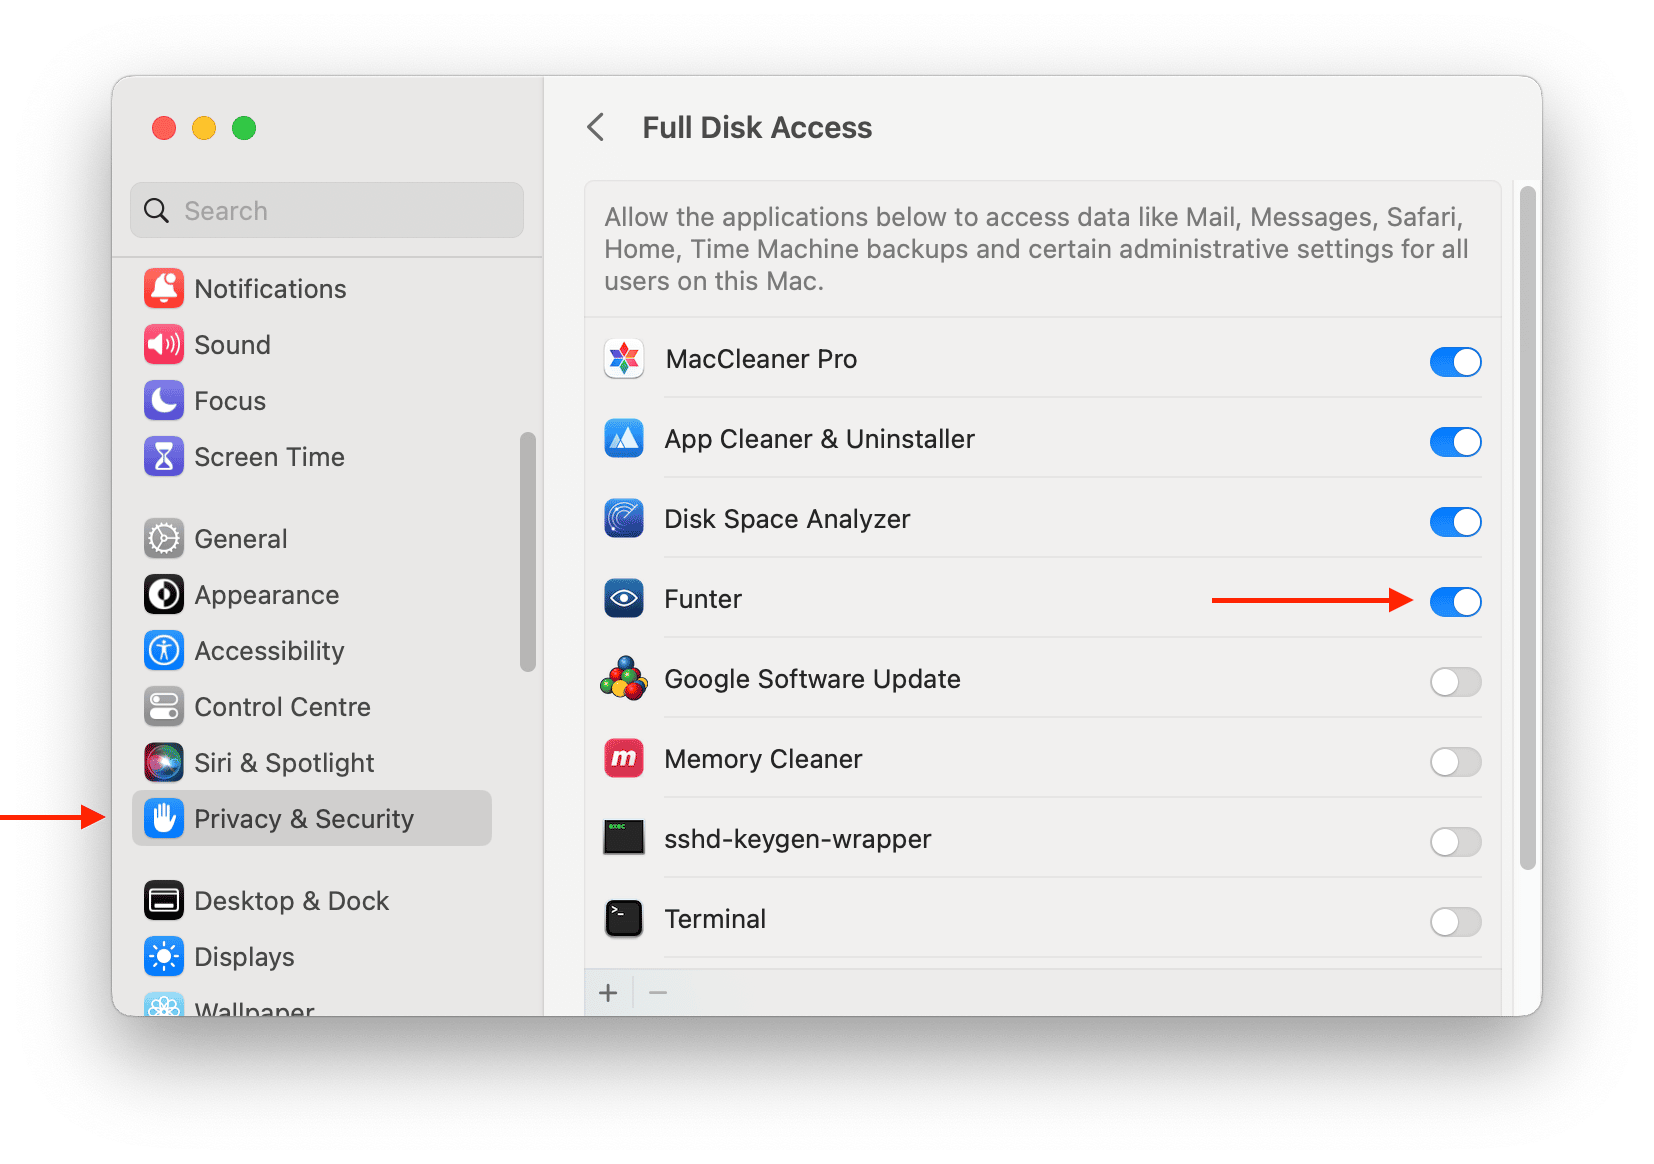 Full disk access for Funter